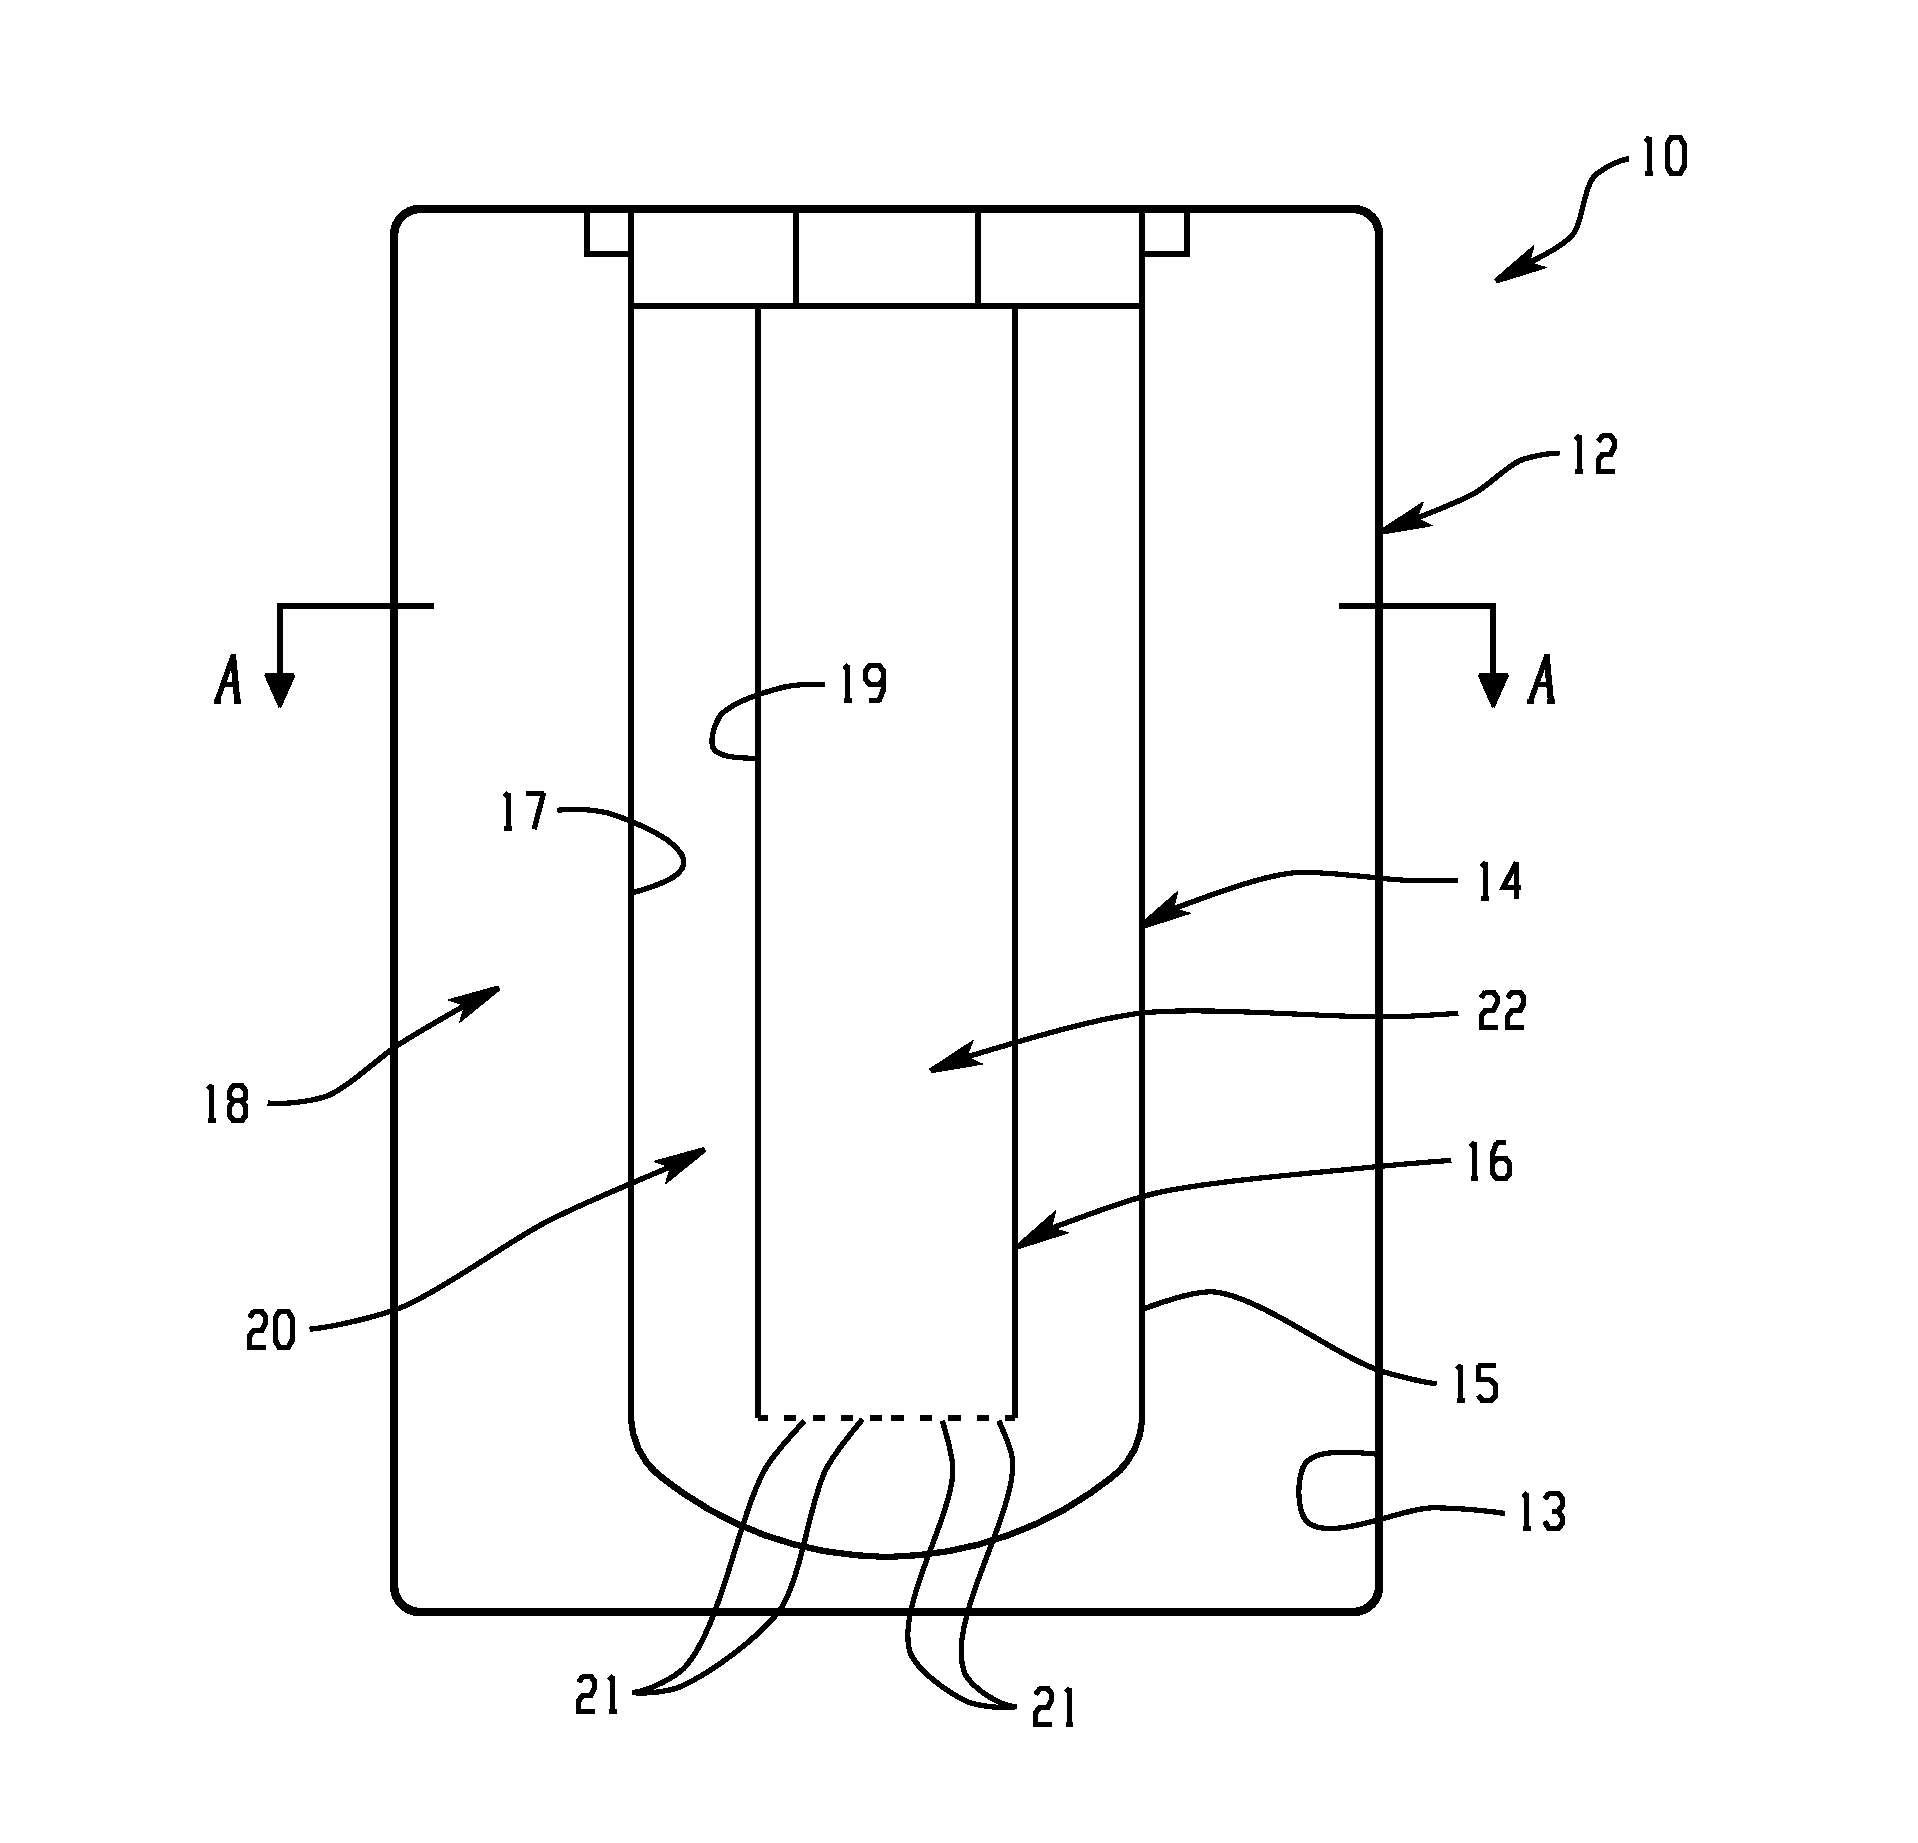 Energy storage device and associated method